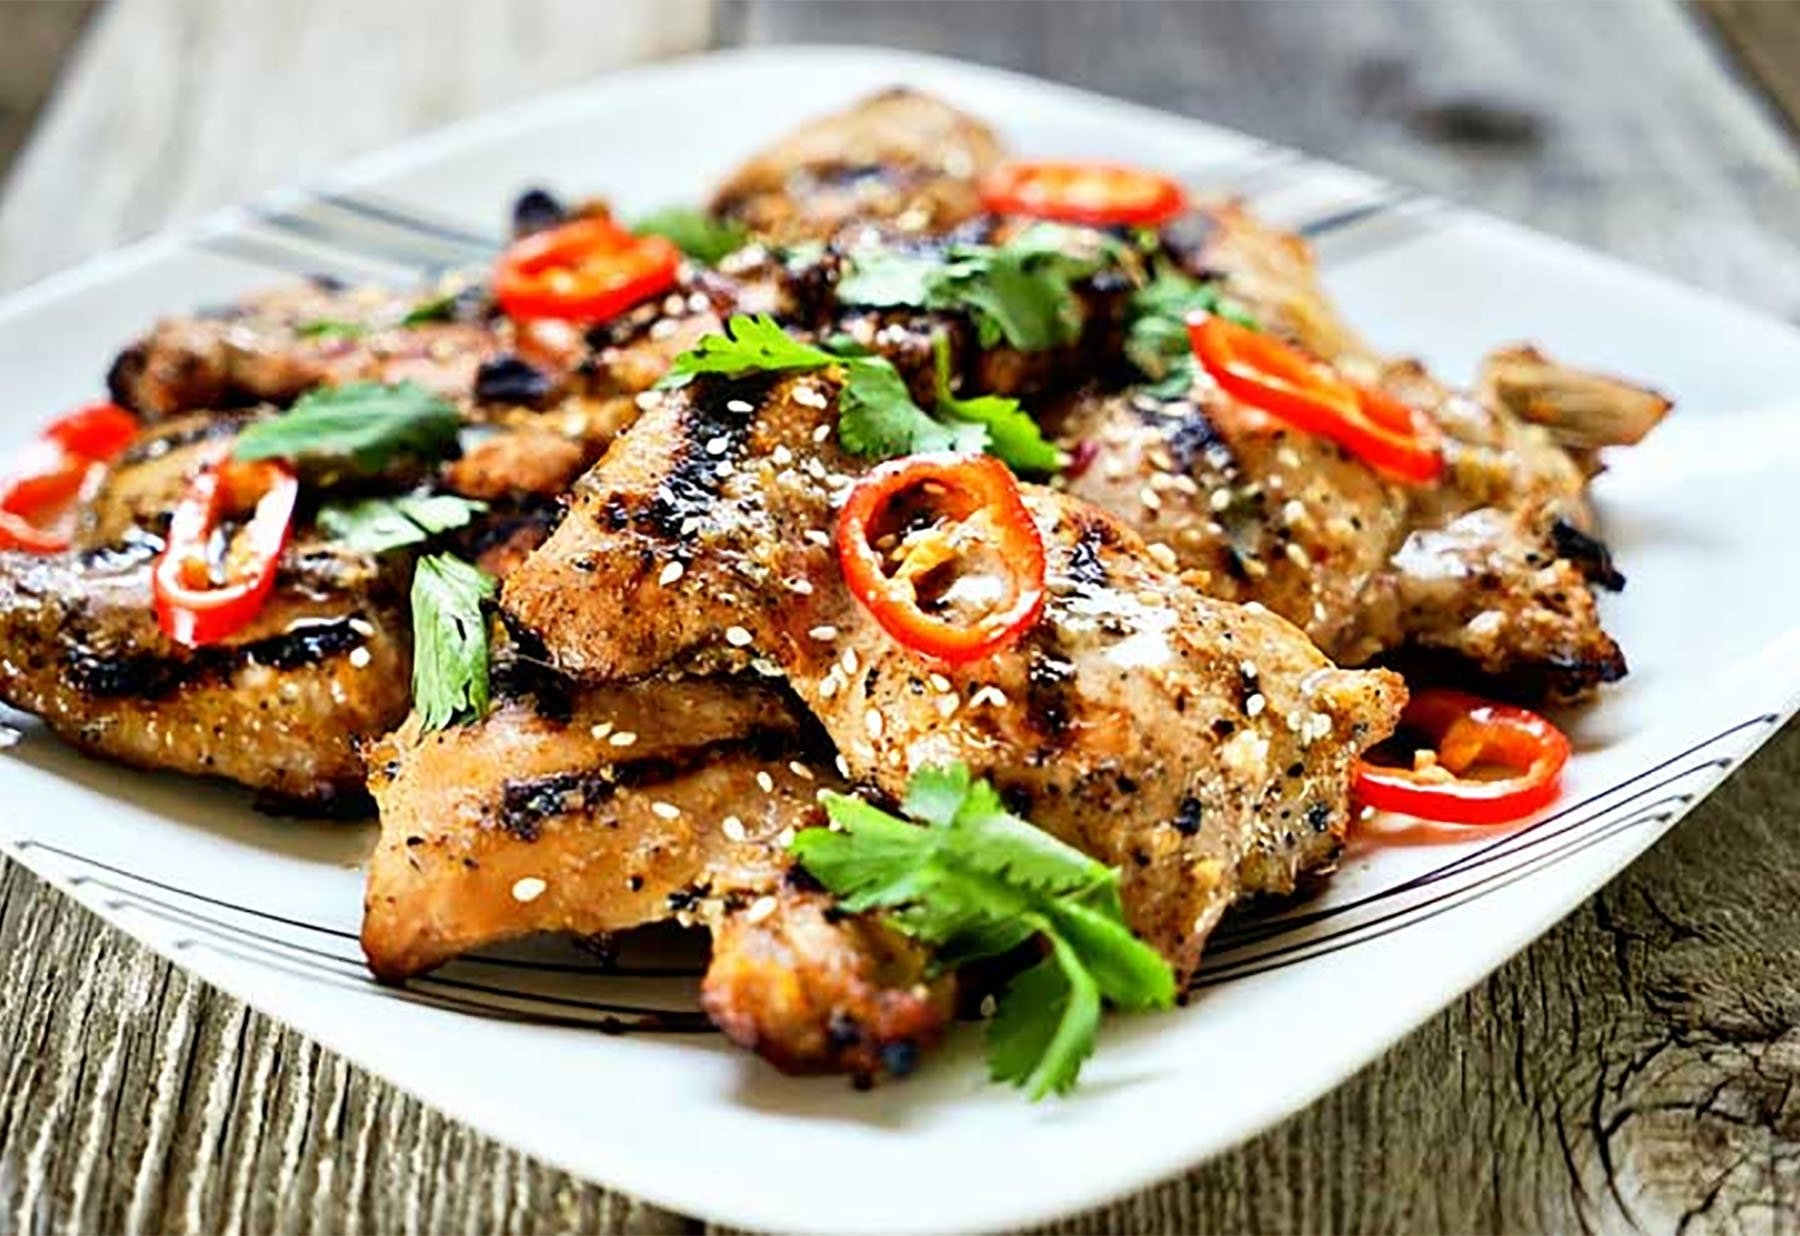 10 Beautiful Healthy Dinner Ideas For Two chicken breast recipes 60 ways to spice up boring poultry greatist 2023